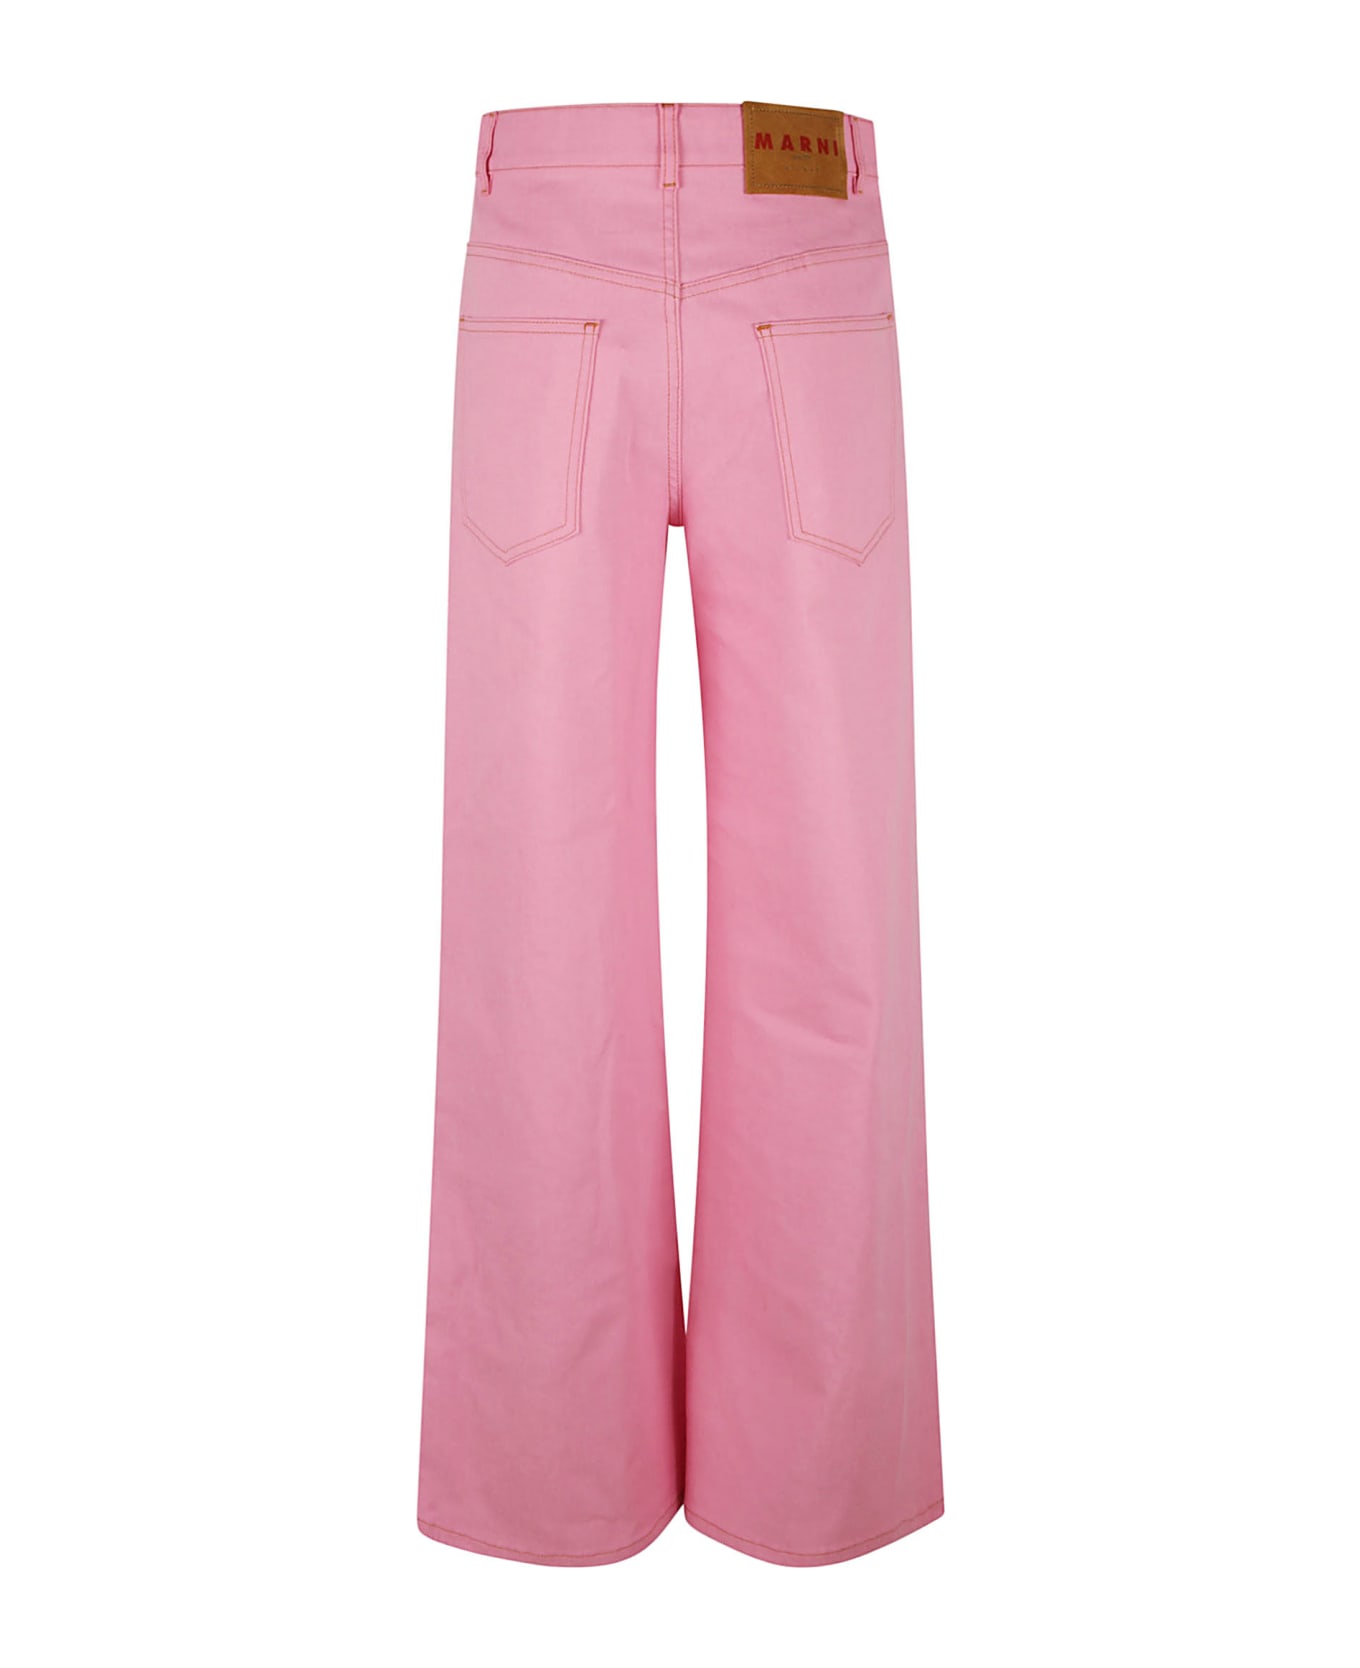 Marni Straight Buttoned Jeans - Pink